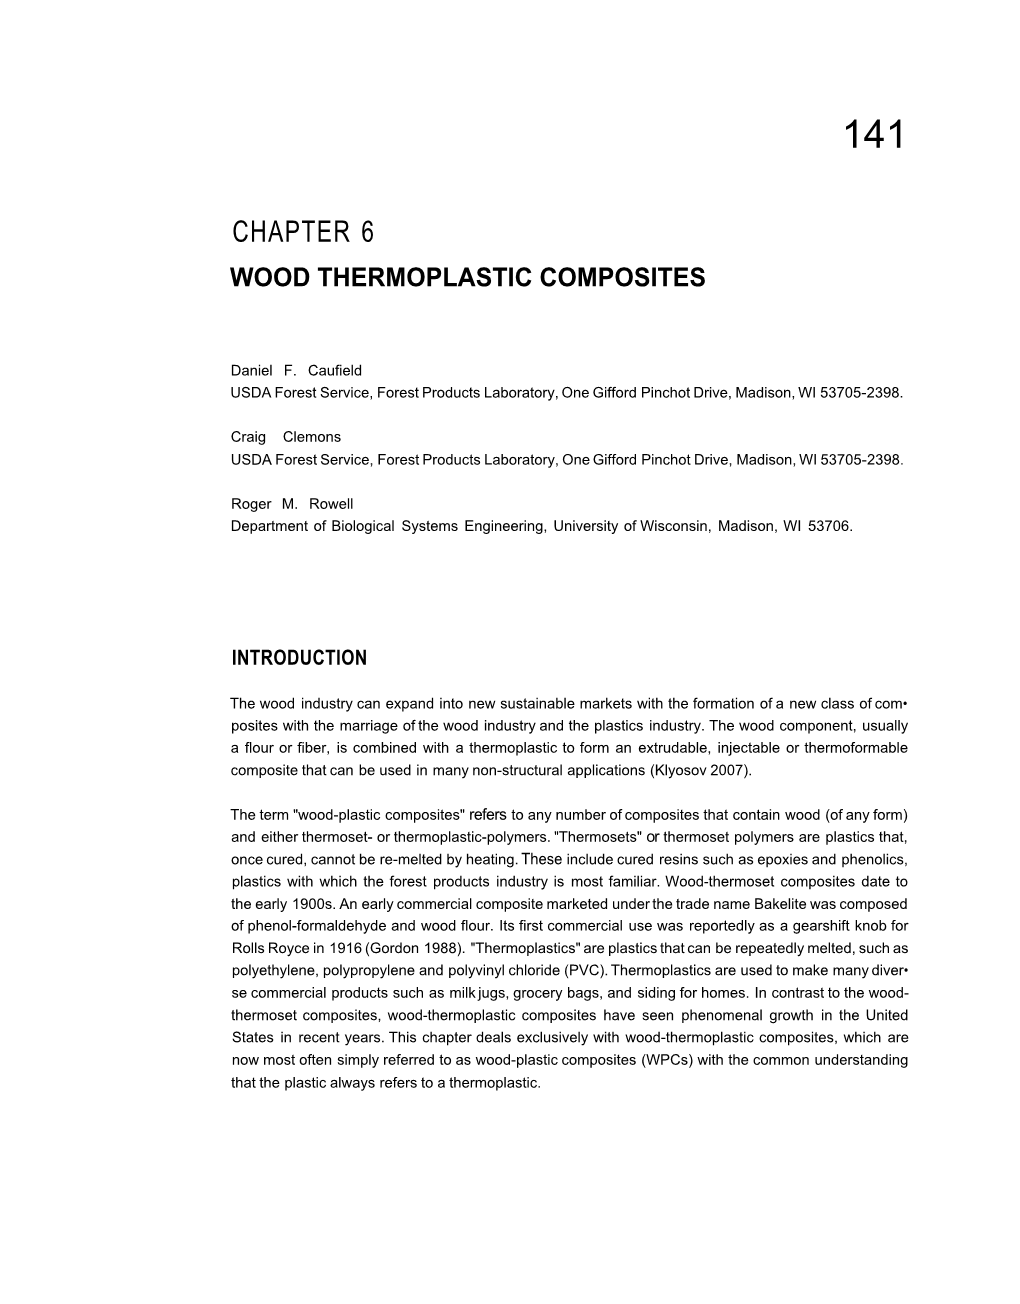 Chapter 6 Wood Thermoplastic Composites